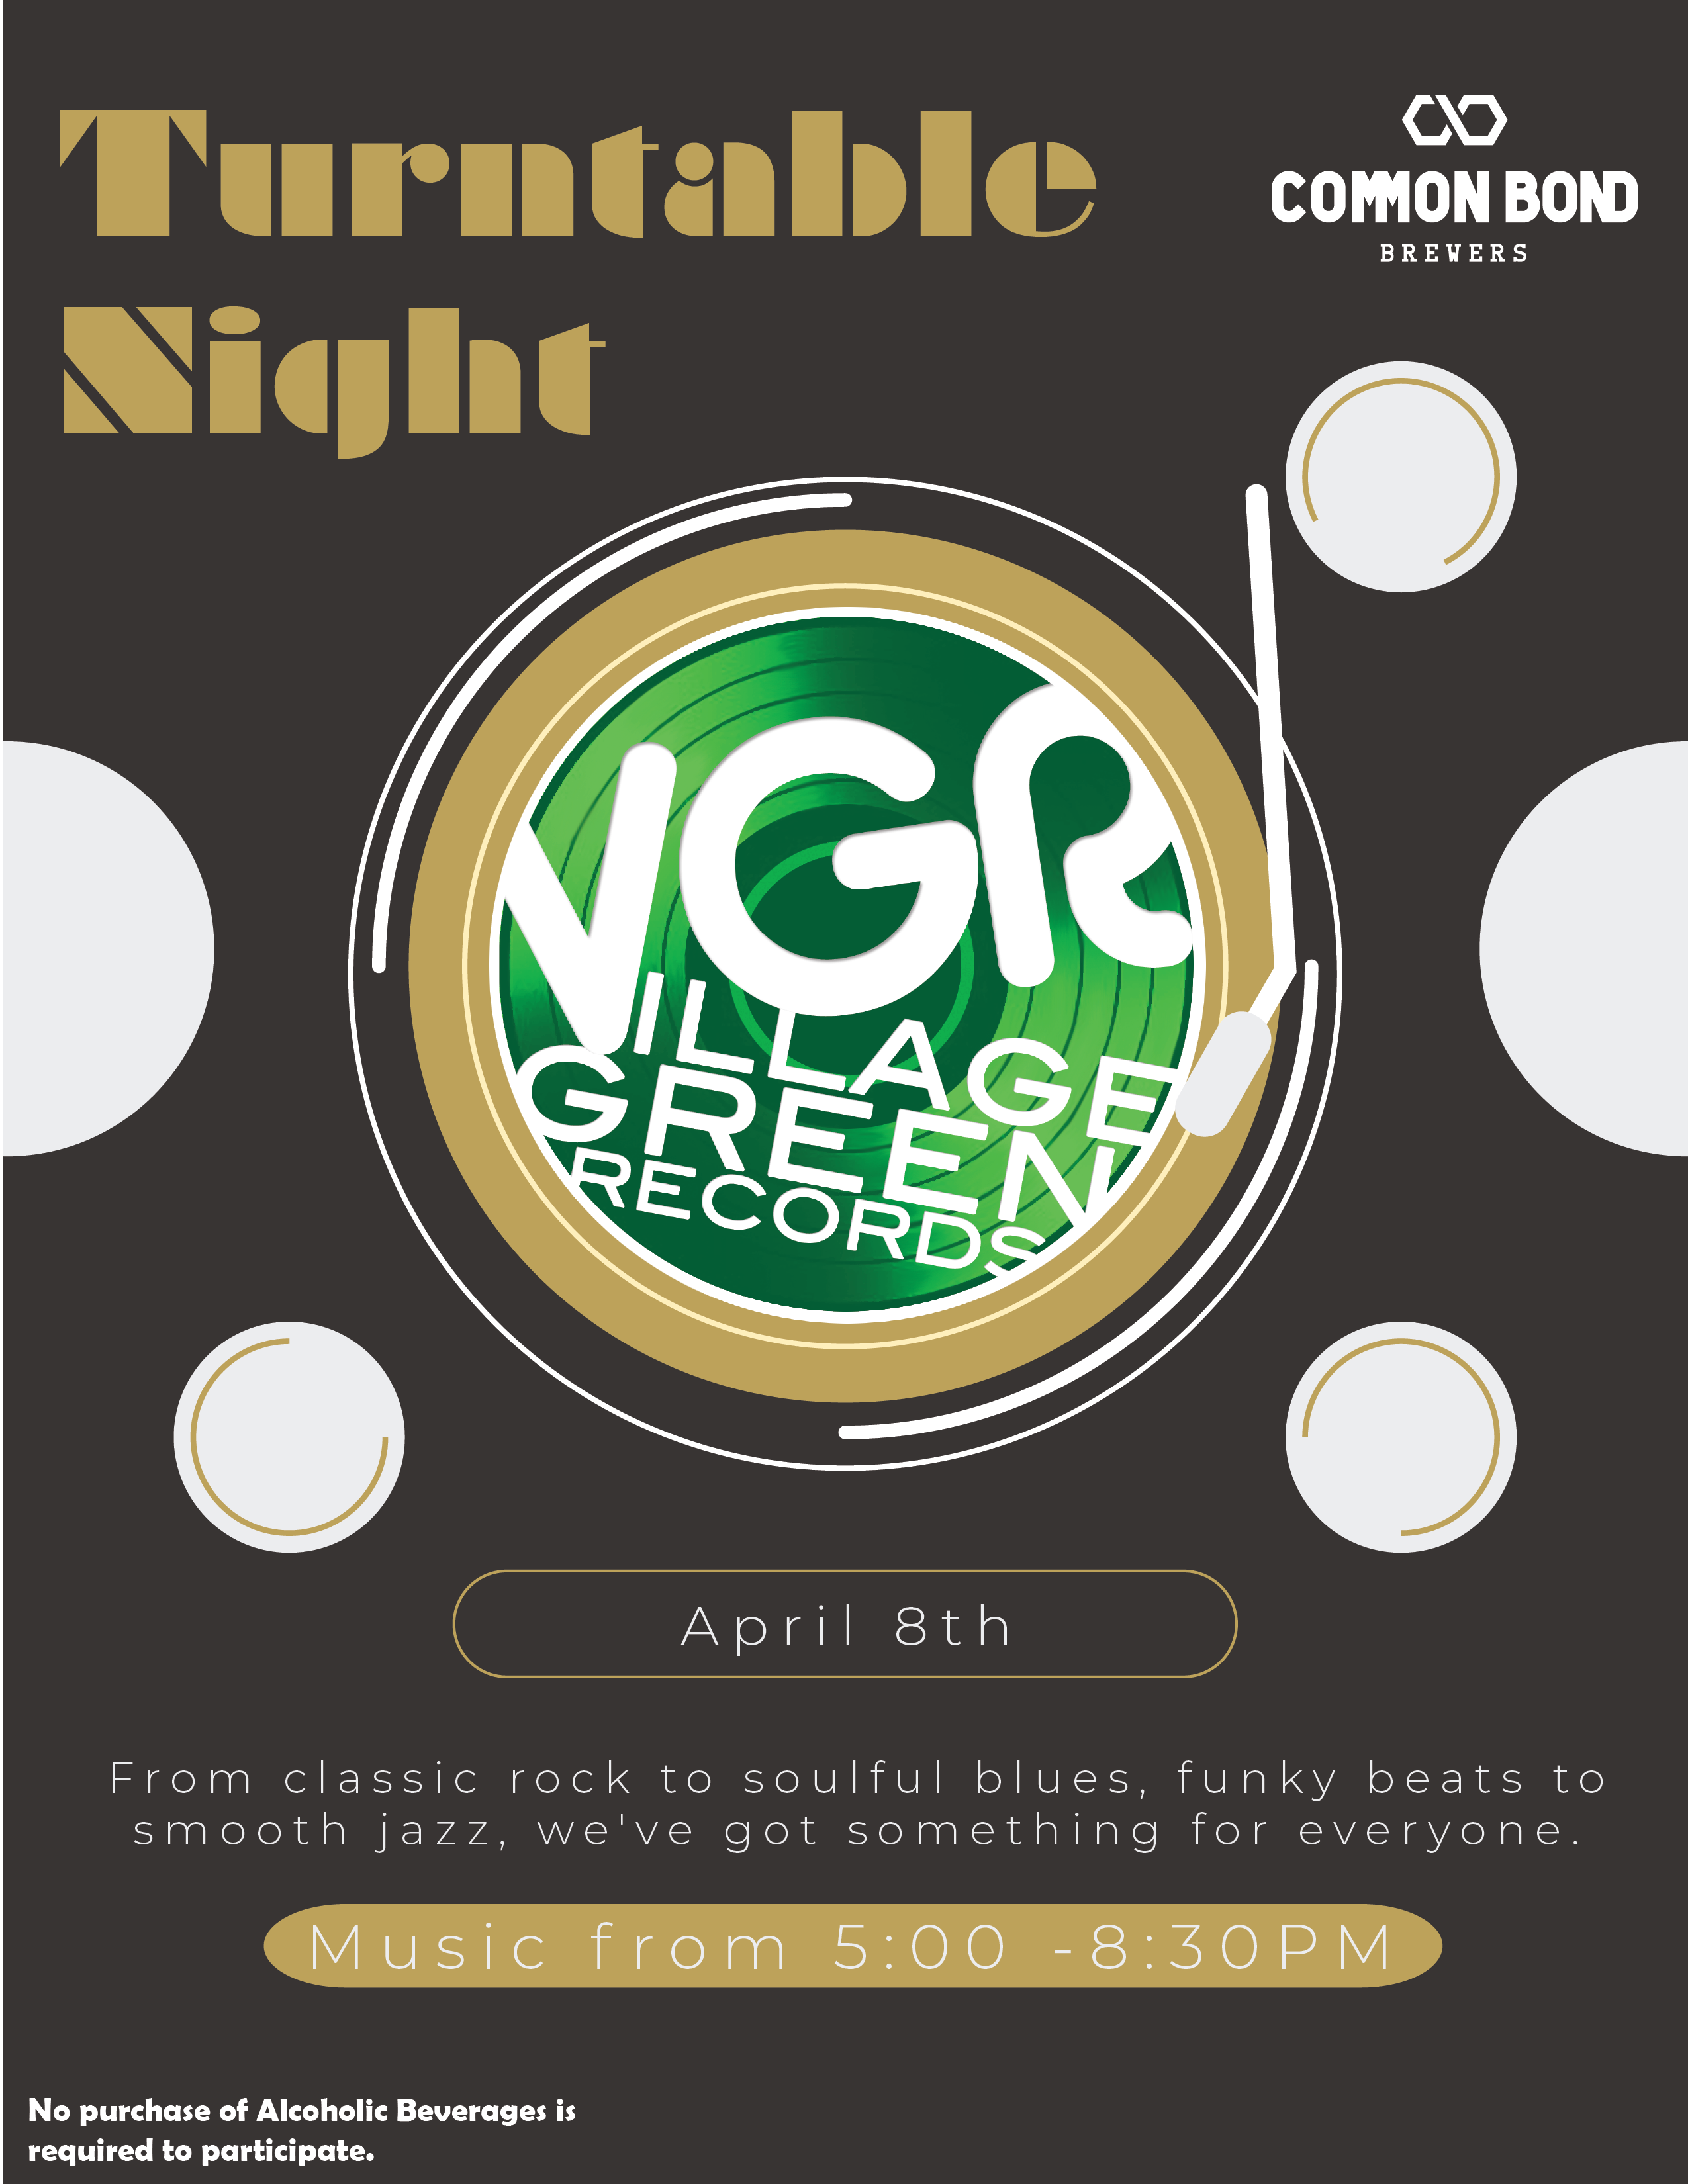 Village Green Records Presents: Turntable Night